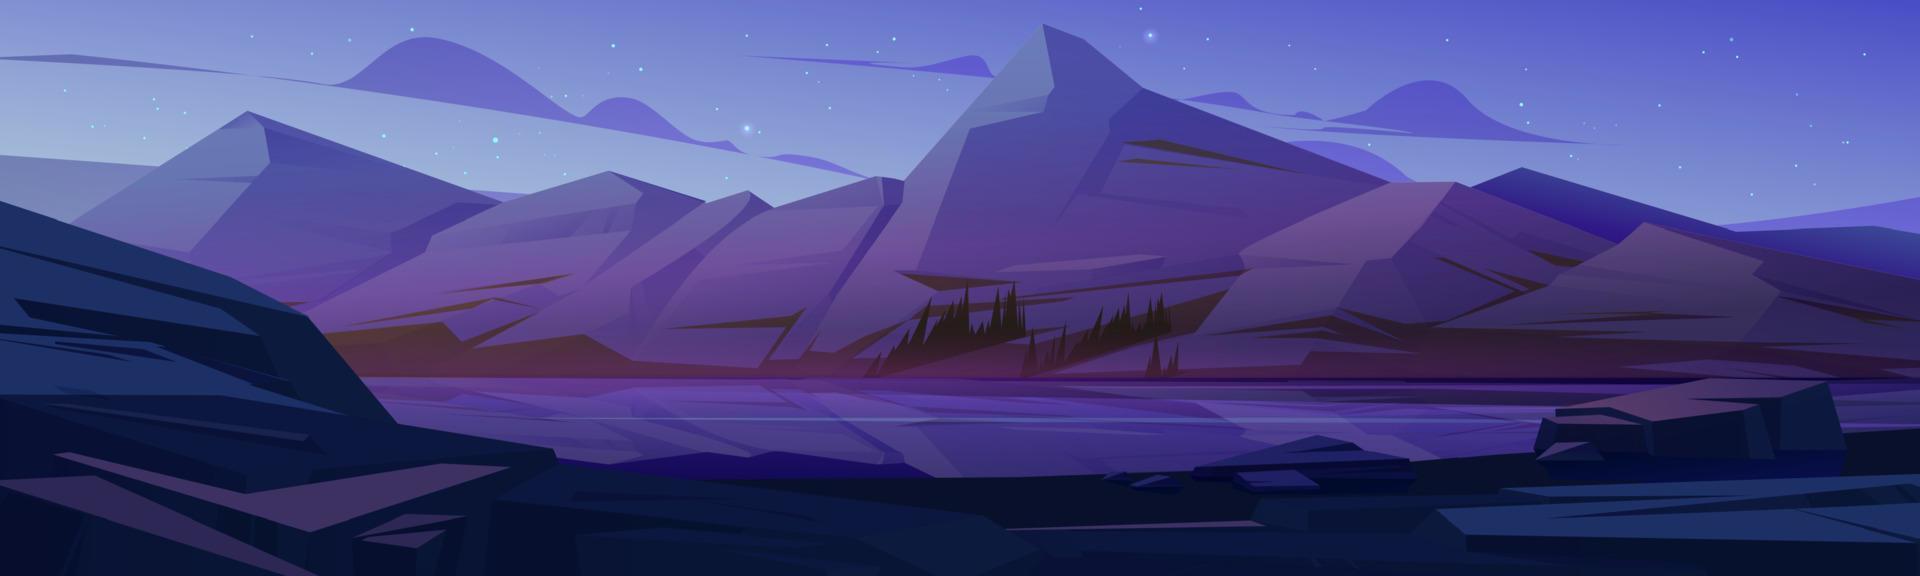 Nordic landscape with mountains and river at night vector